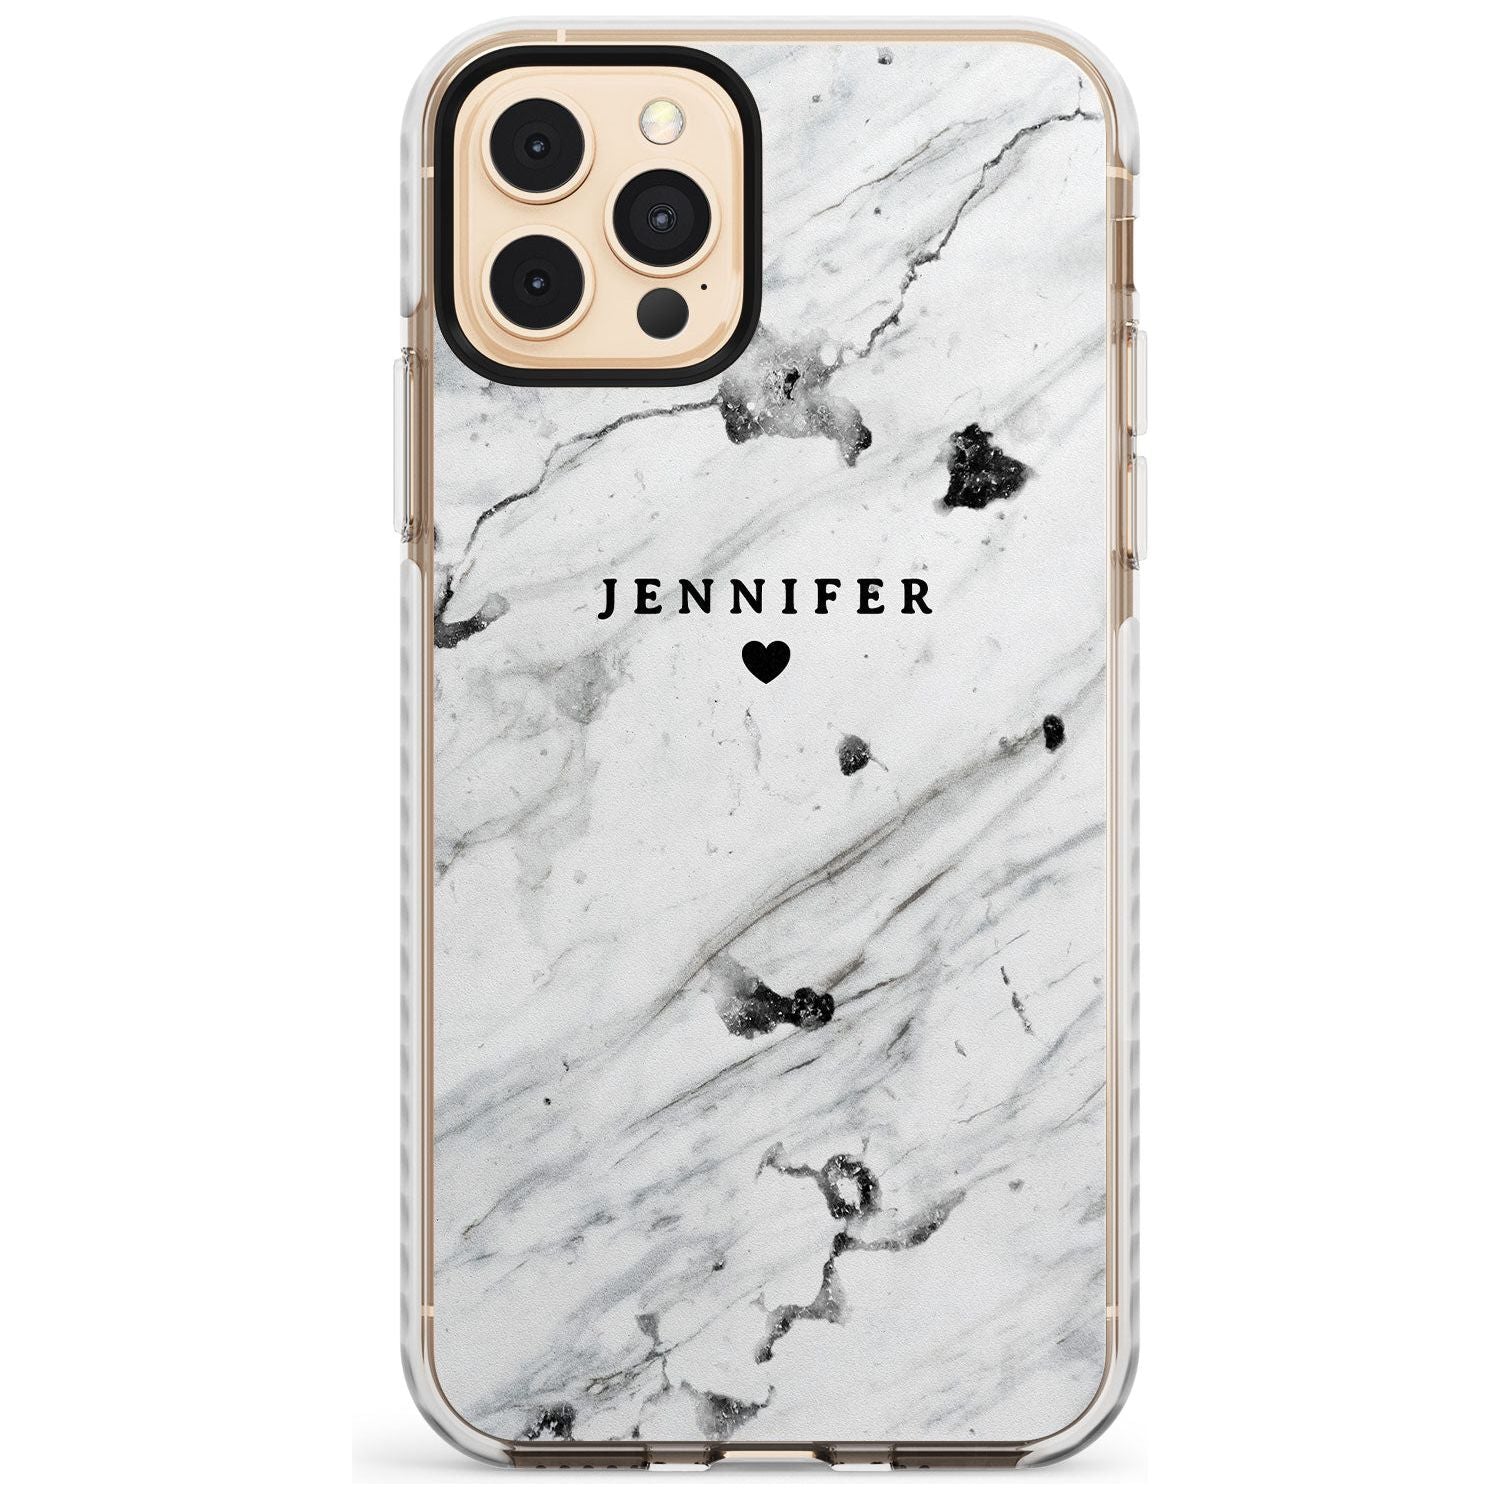 Personalised Black & White Marble Slim TPU Phone Case for iPhone 11 Pro Max